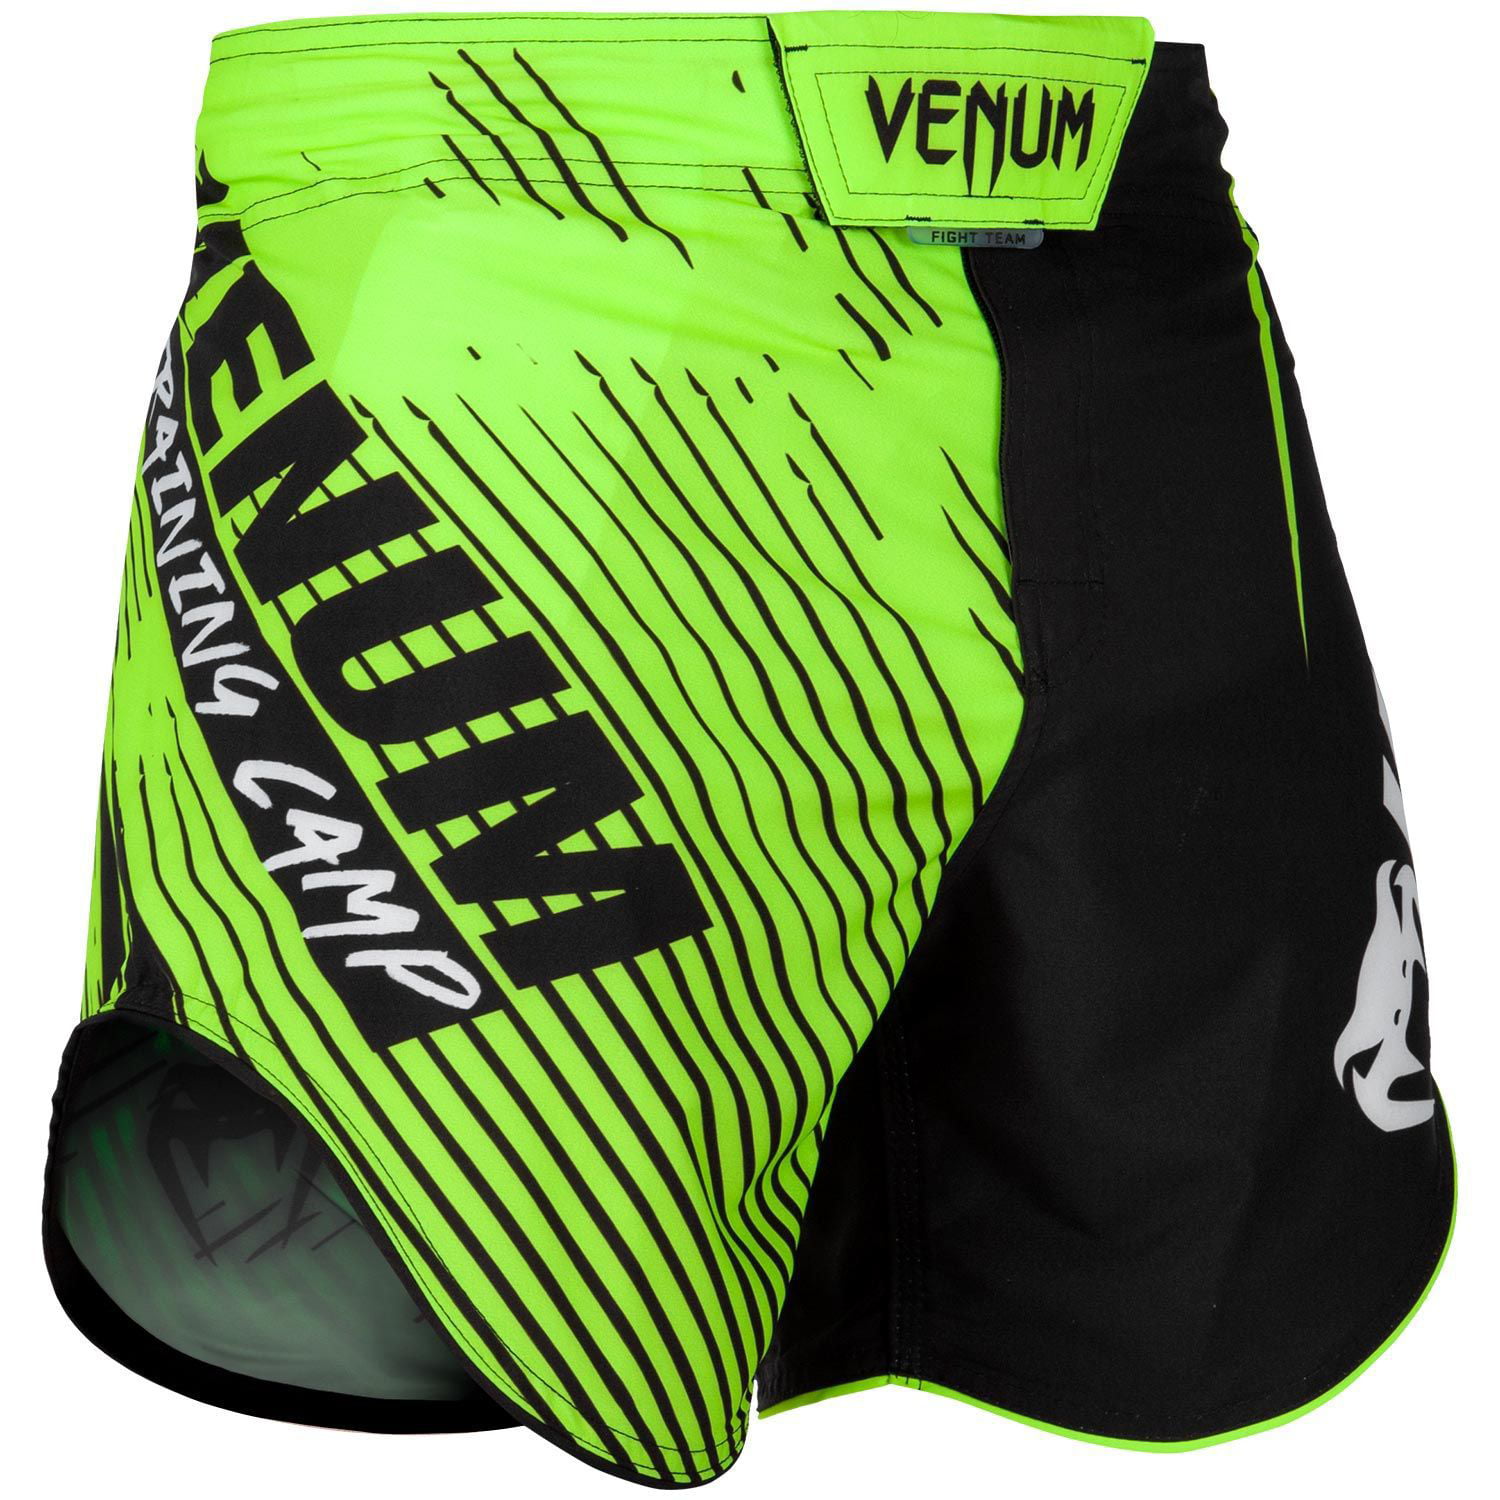 Black/Neon Yellow Venum Training Camp 2.0 Sparring Boxing Gloves 